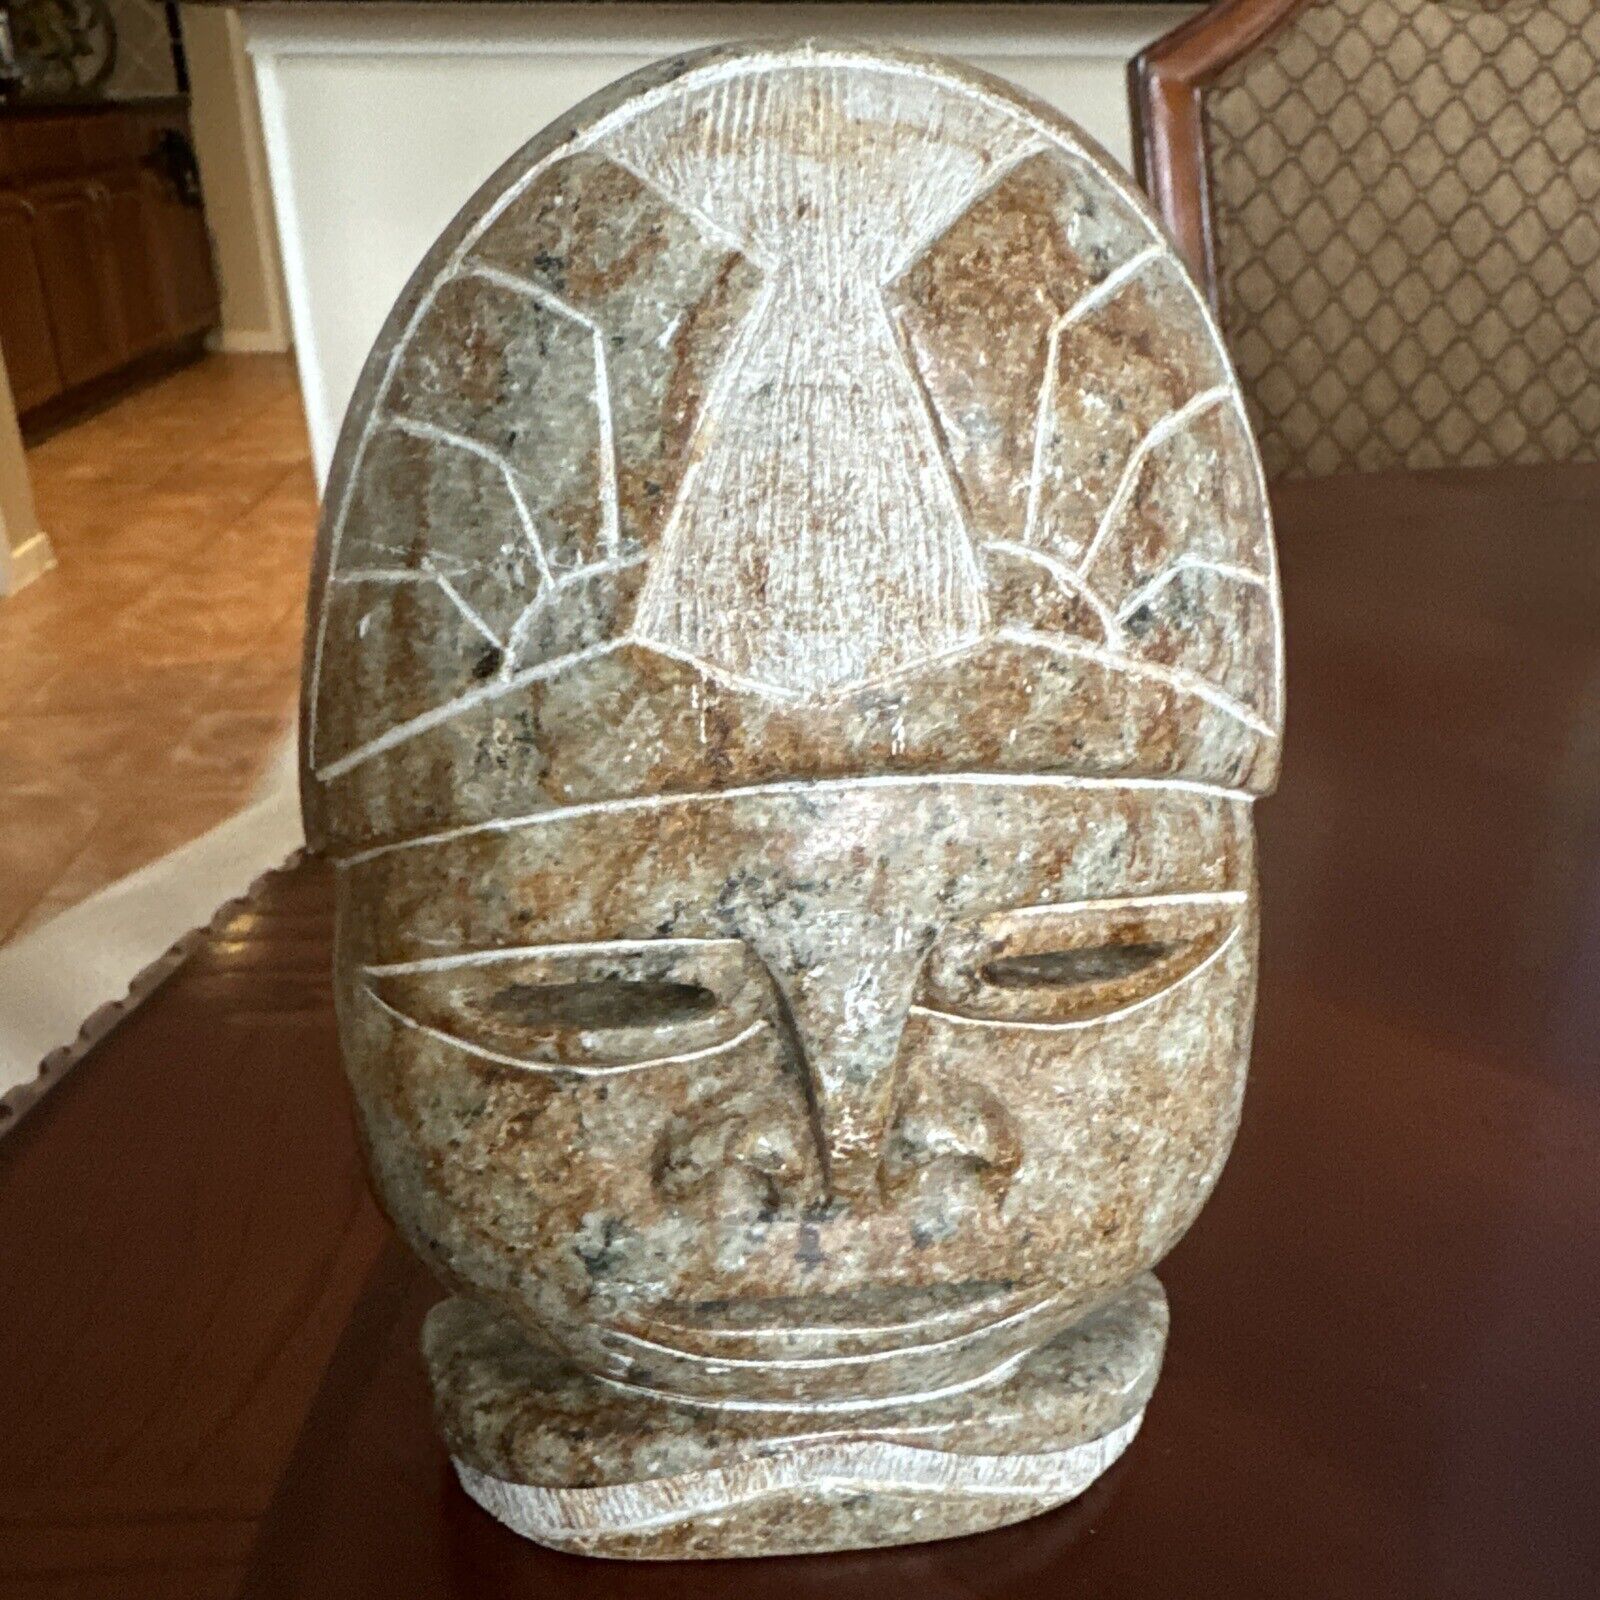 Mayan Mexican/Aztec Marble Stone  Face Heavy Quality Piece Nice 7 1/4” Tall